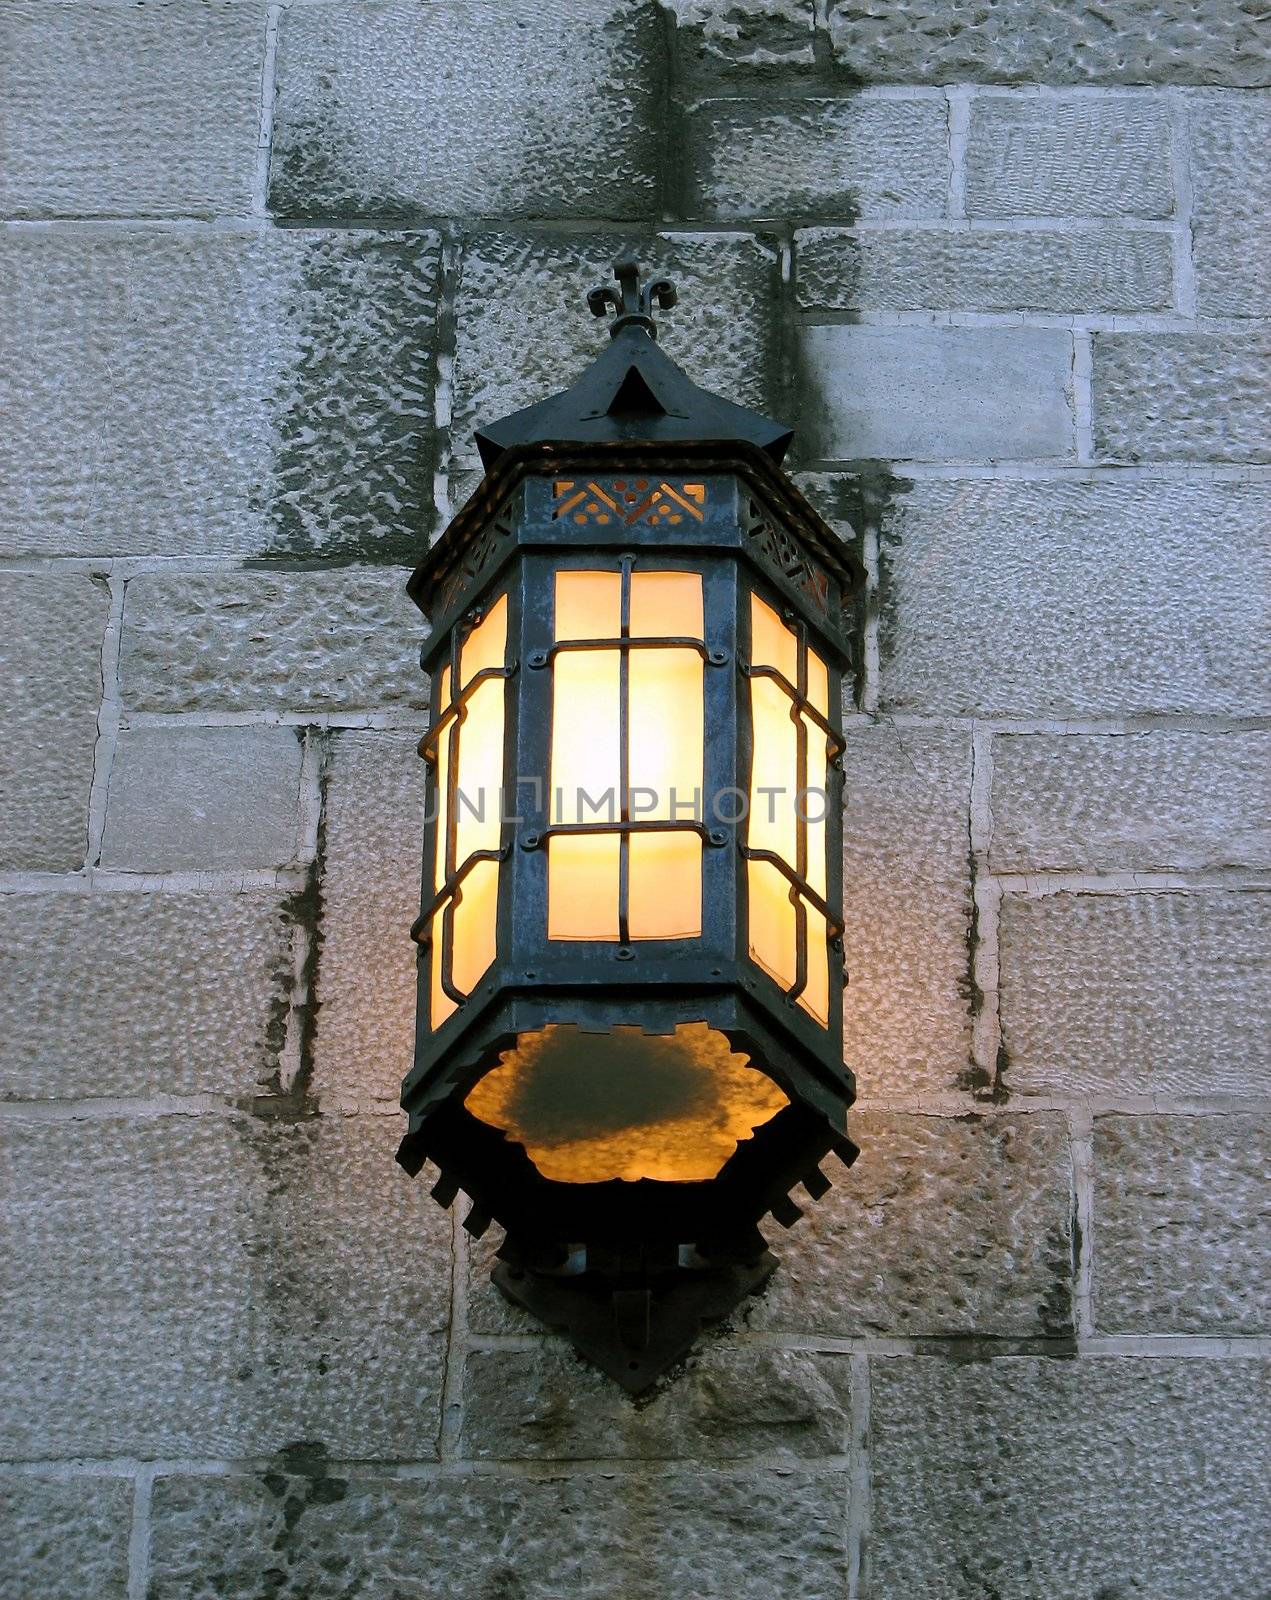 Antique lantern on the wall of an old stone building.